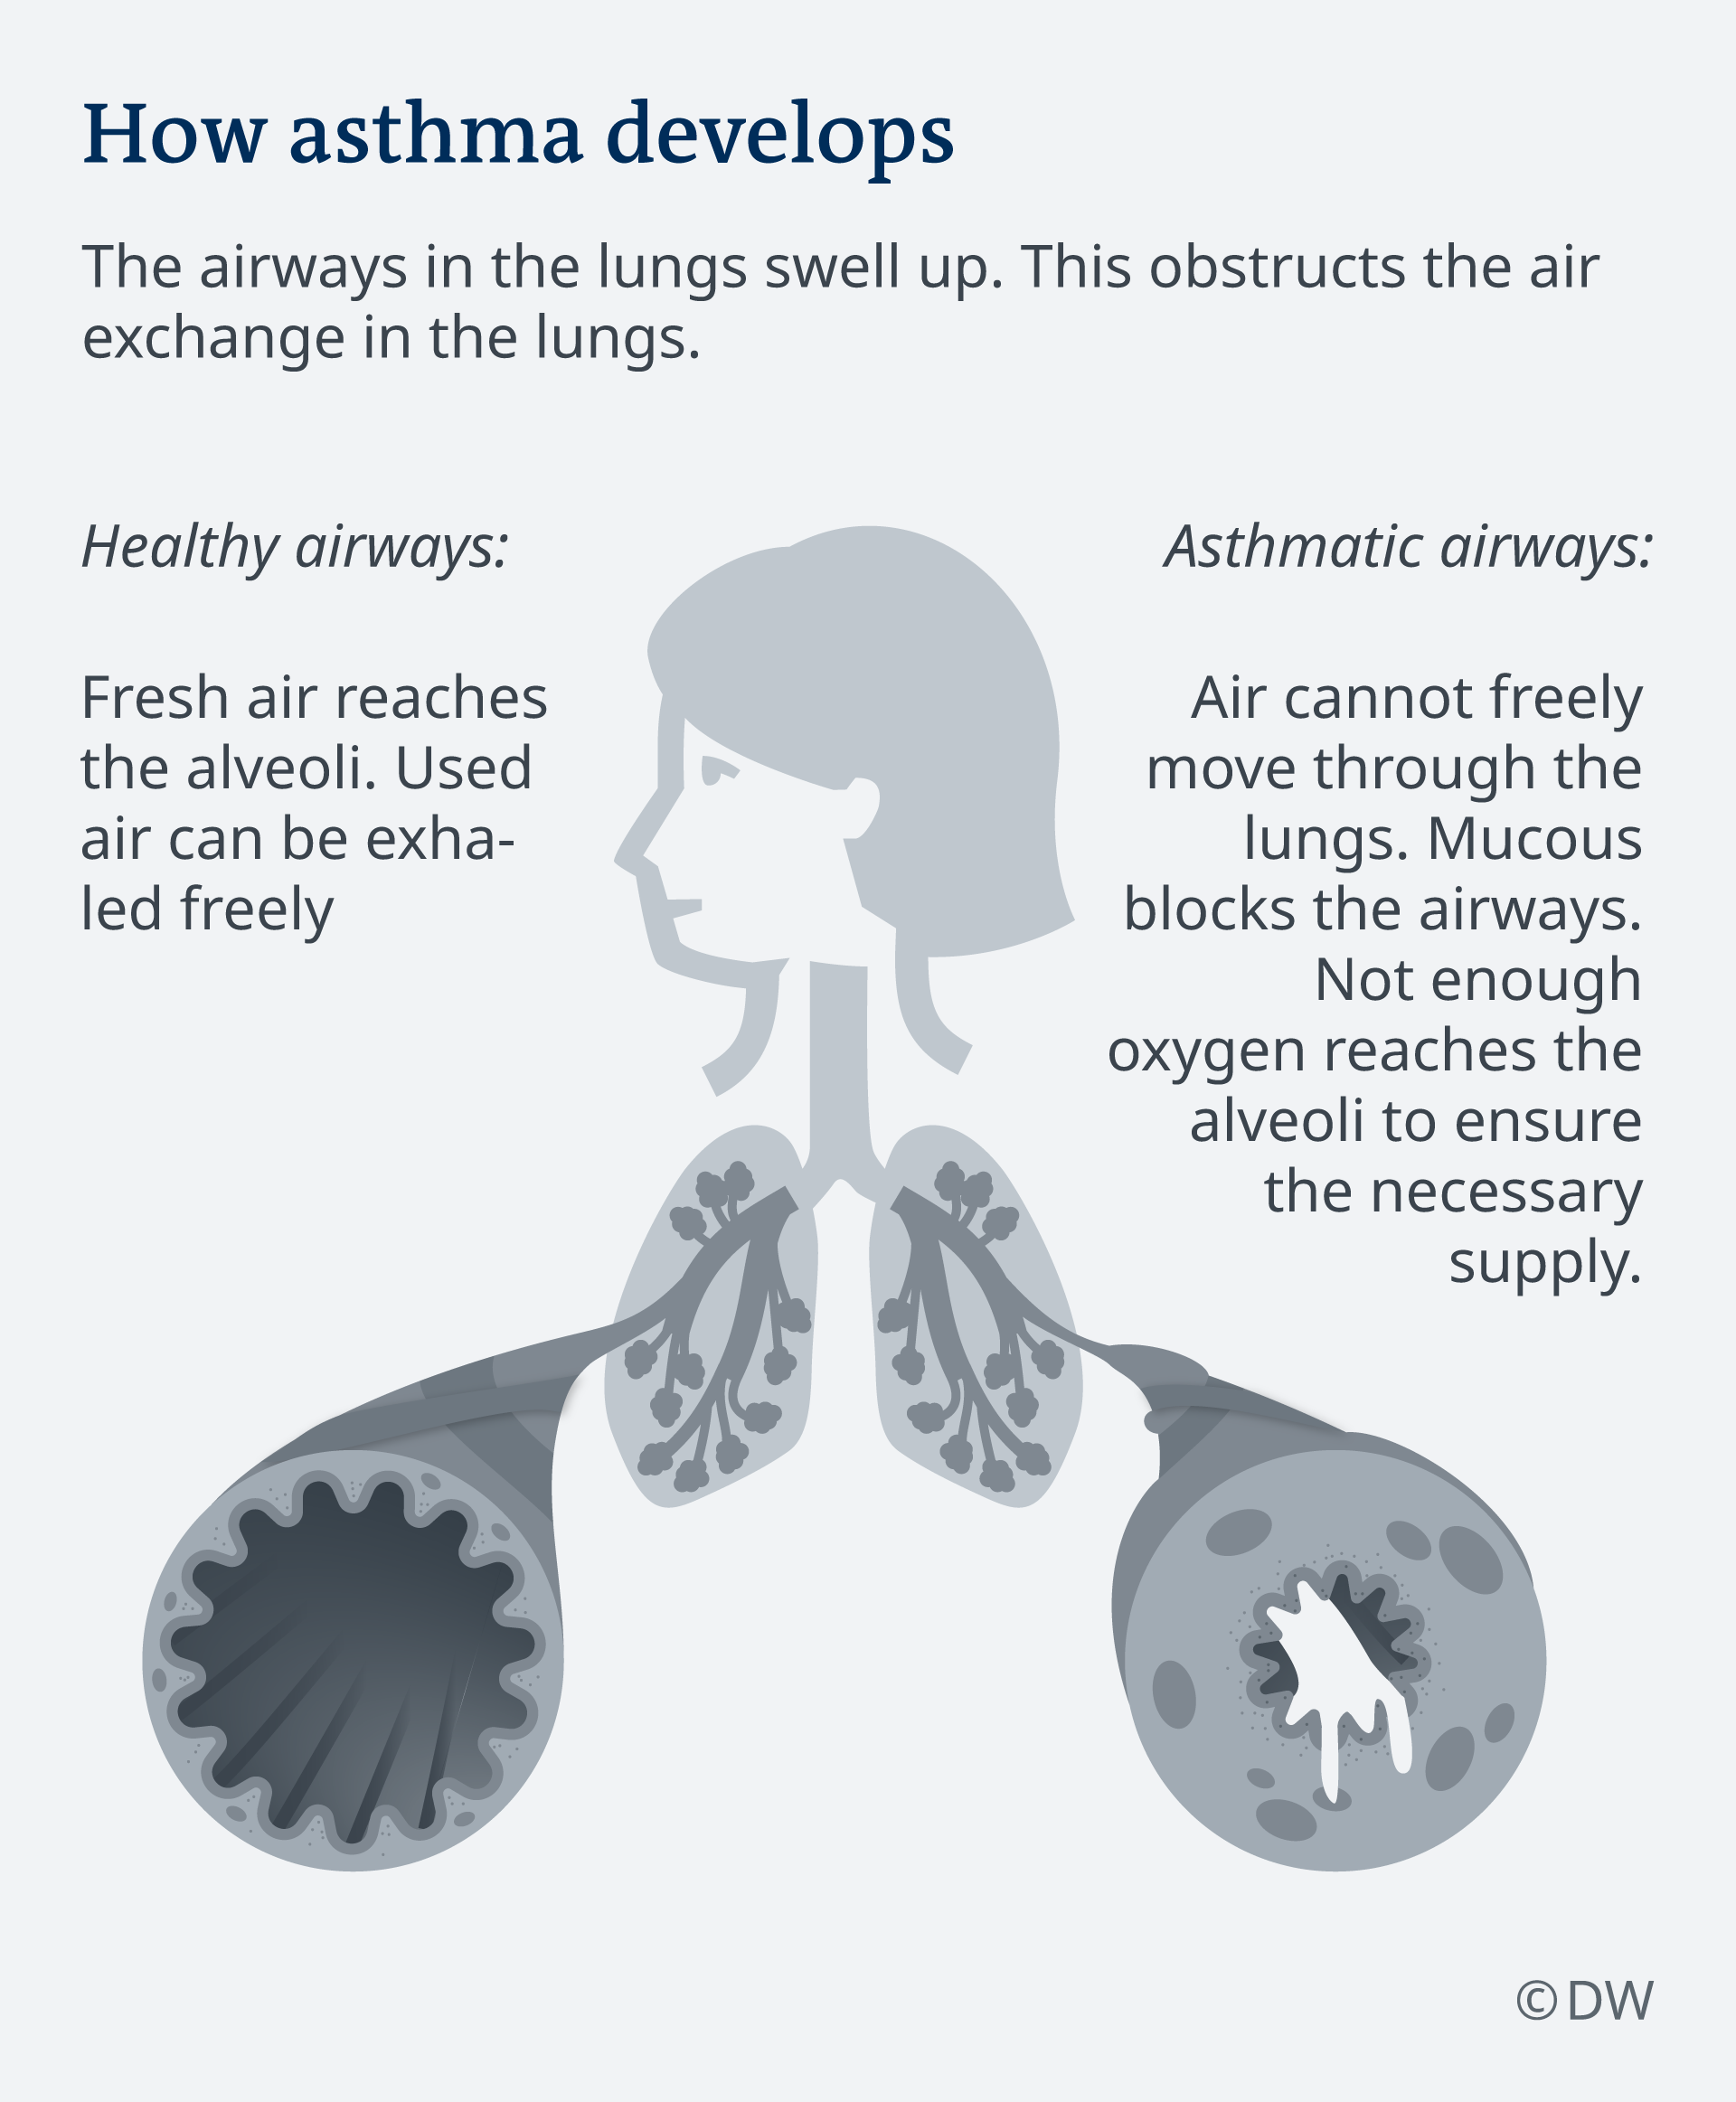 Asthma: When breathing becomes difficult